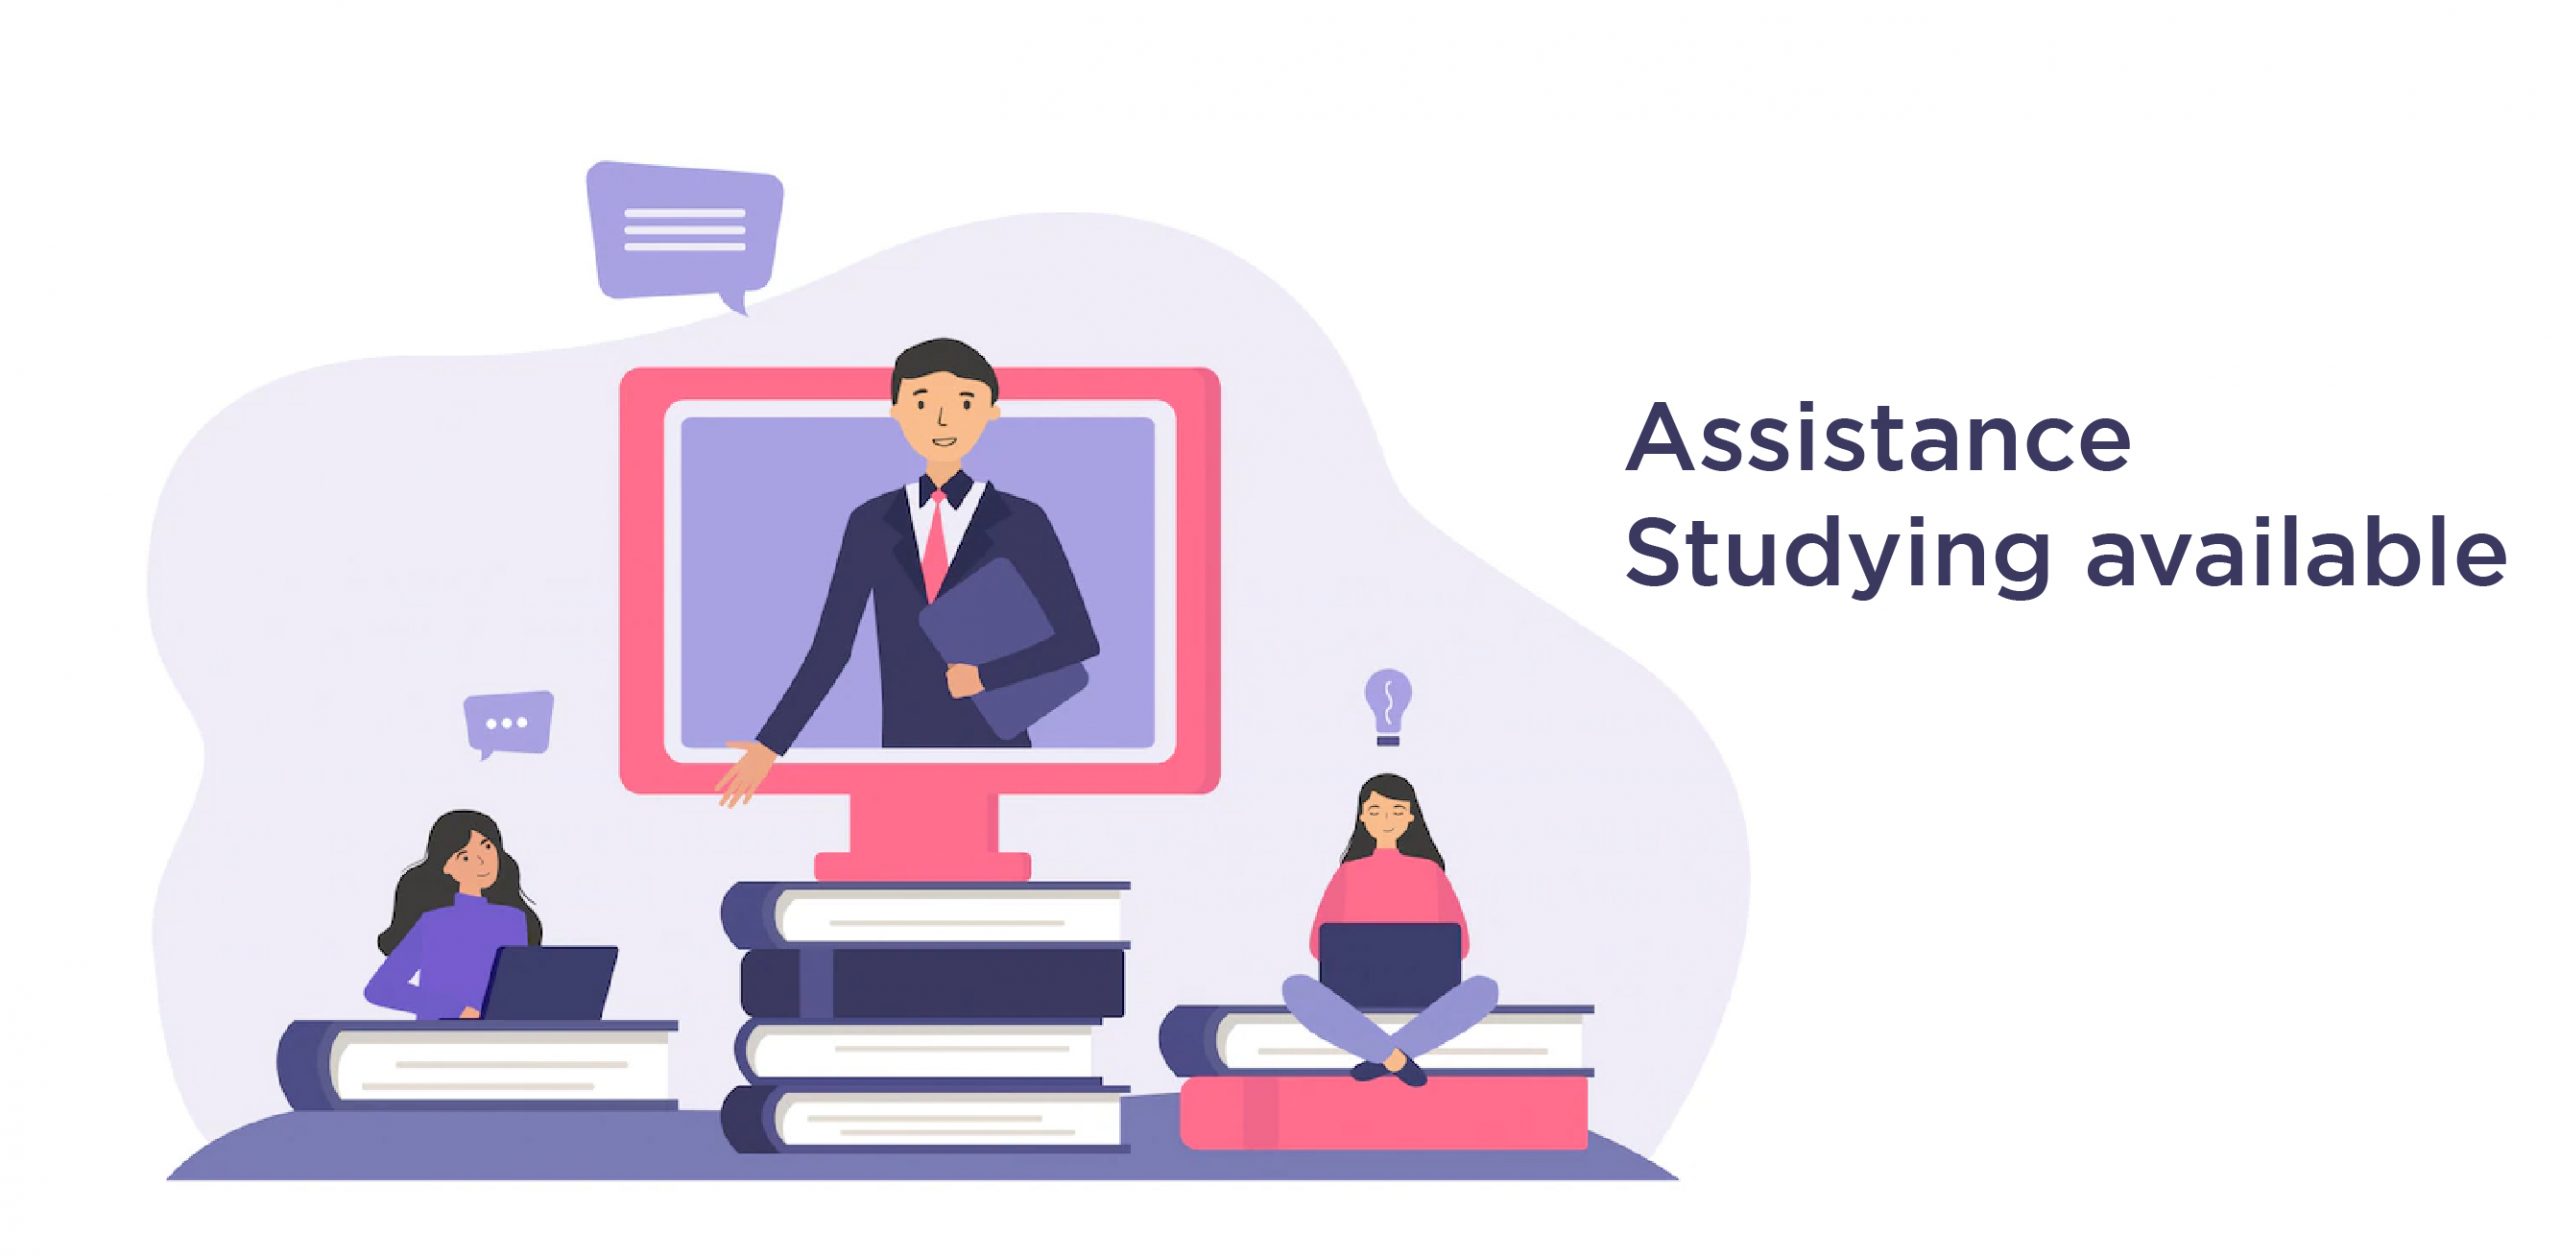 Assistance with studying available around the clock